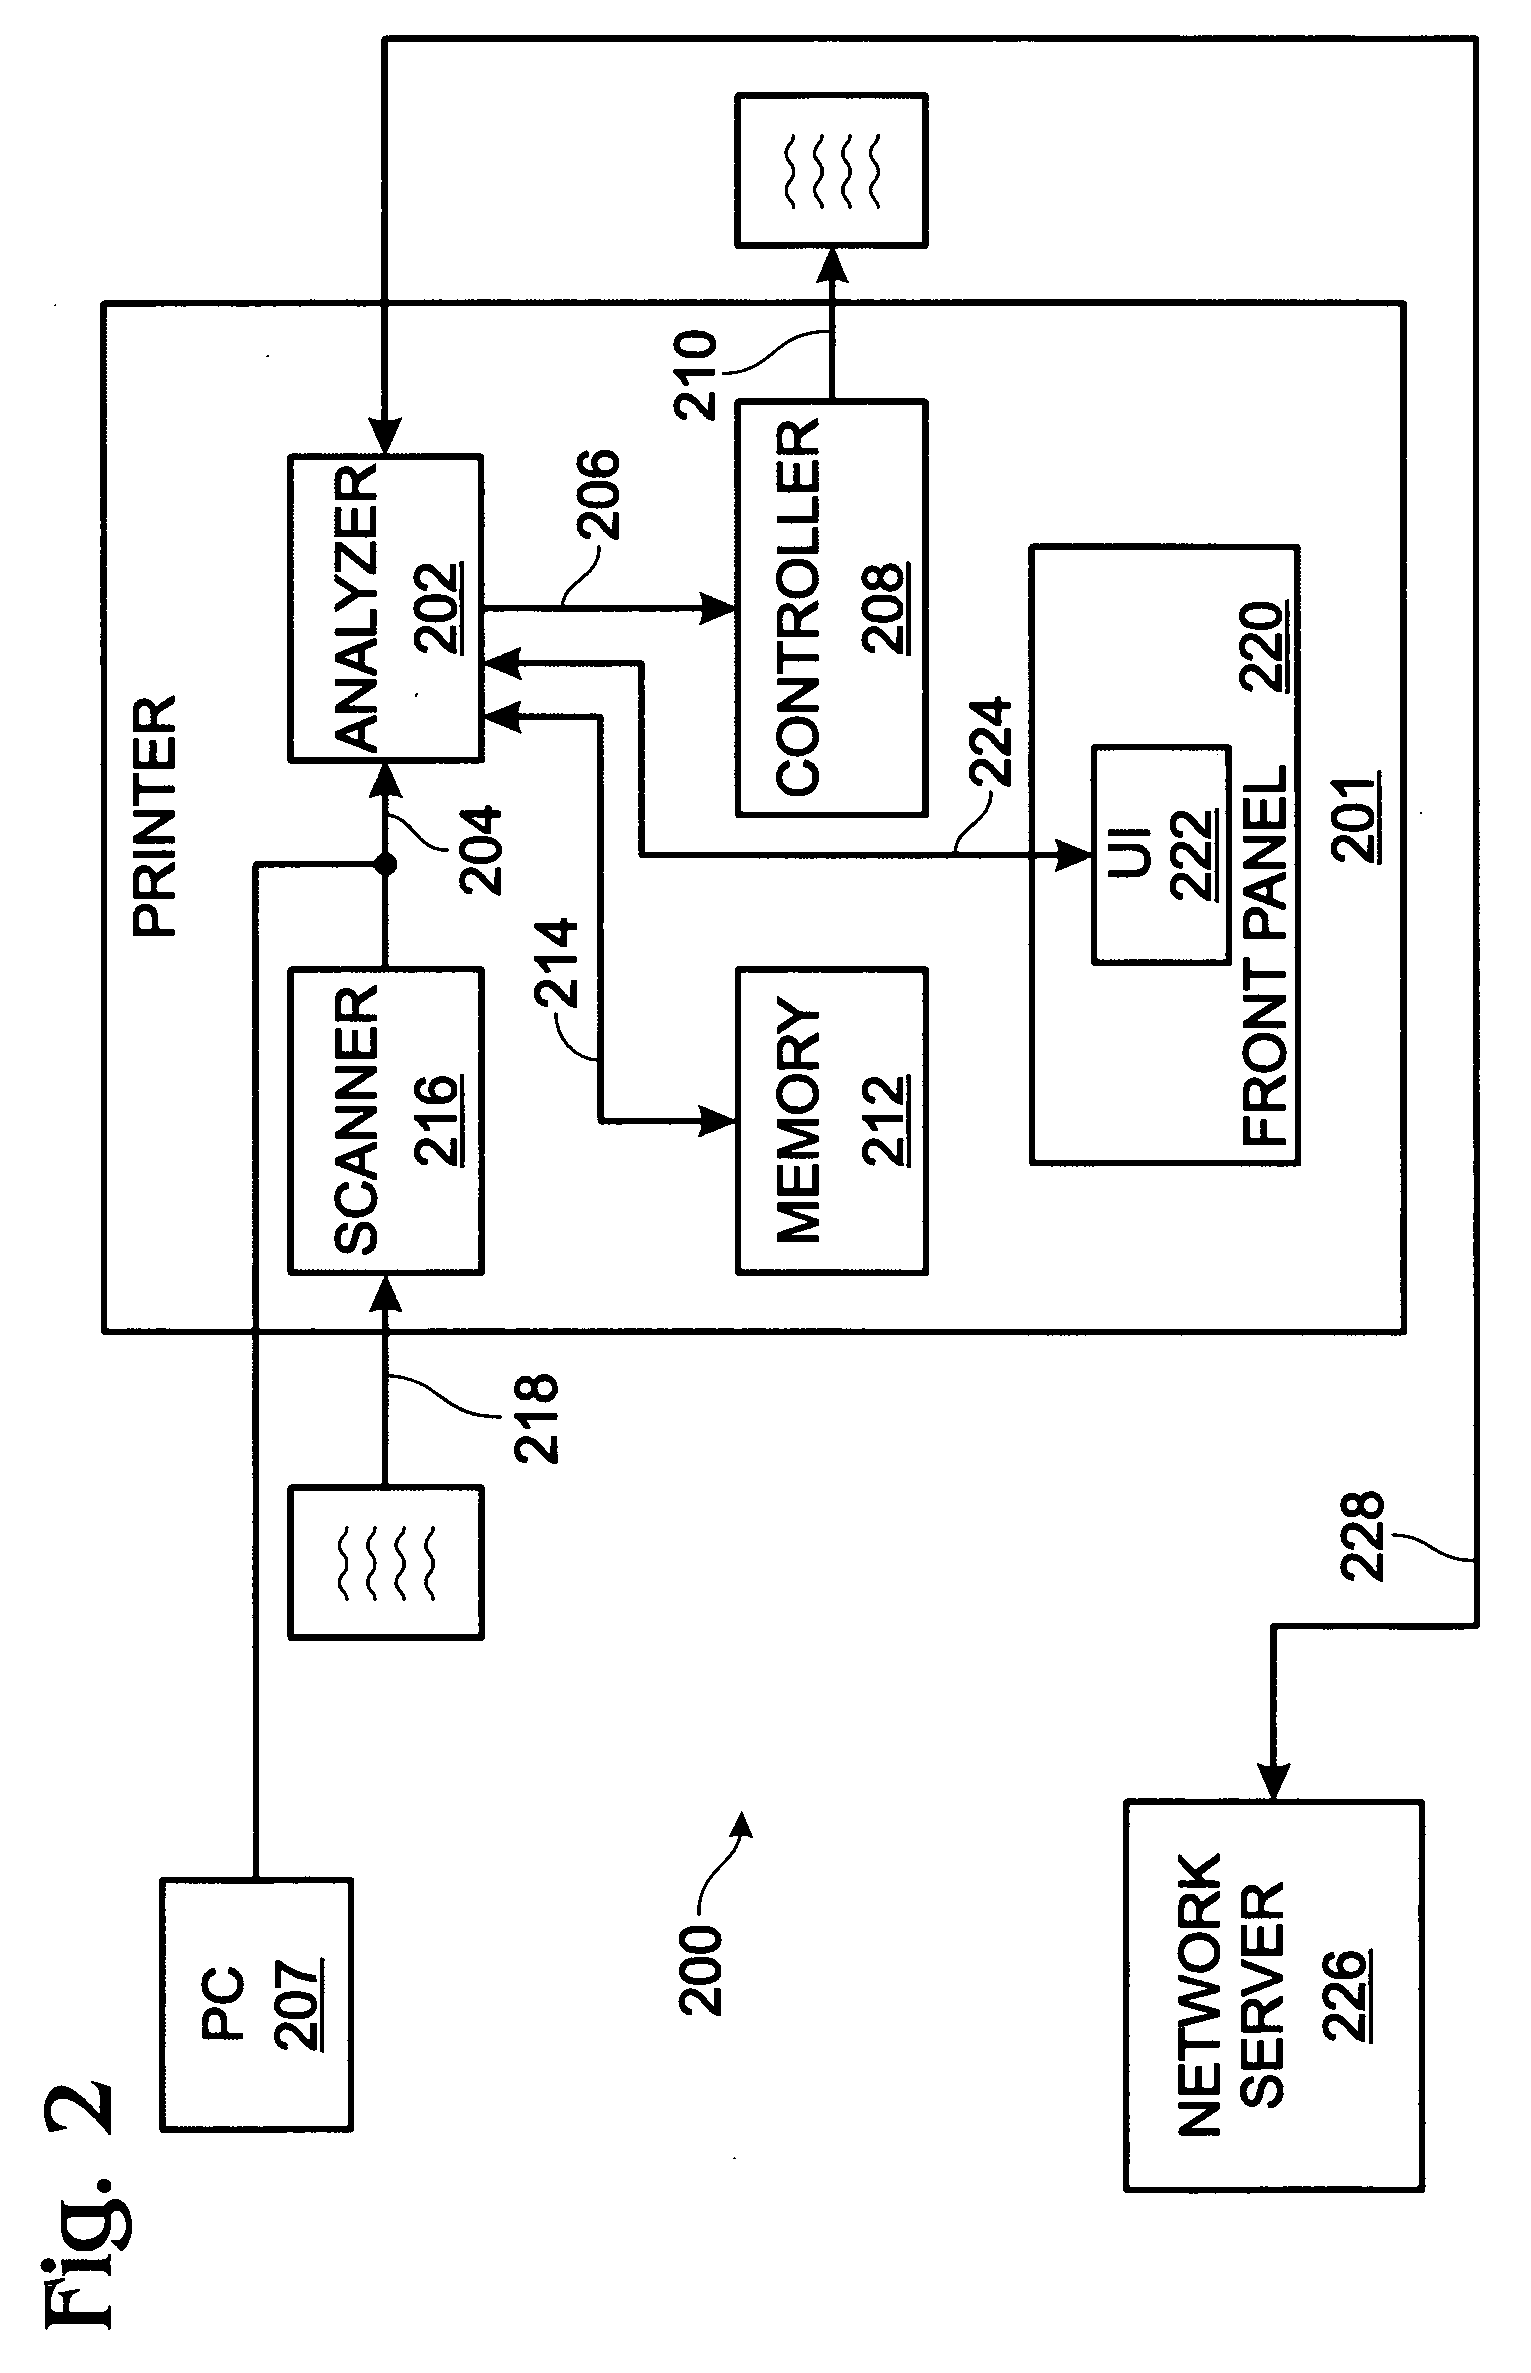 System and method for controlling a printer job responsive to attribute analysis